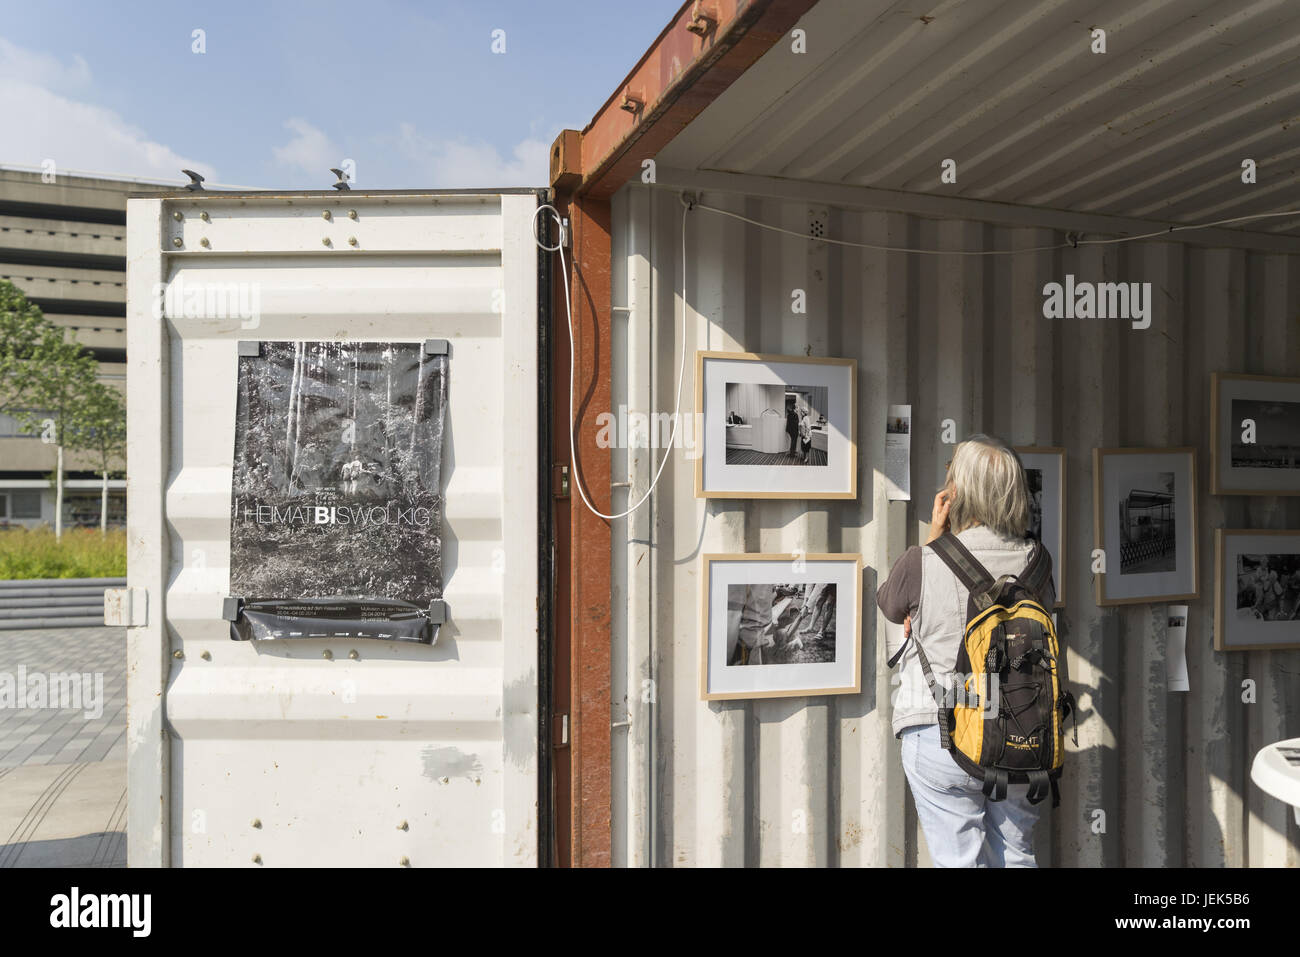 photo exhibition in freight containers Stock Photo